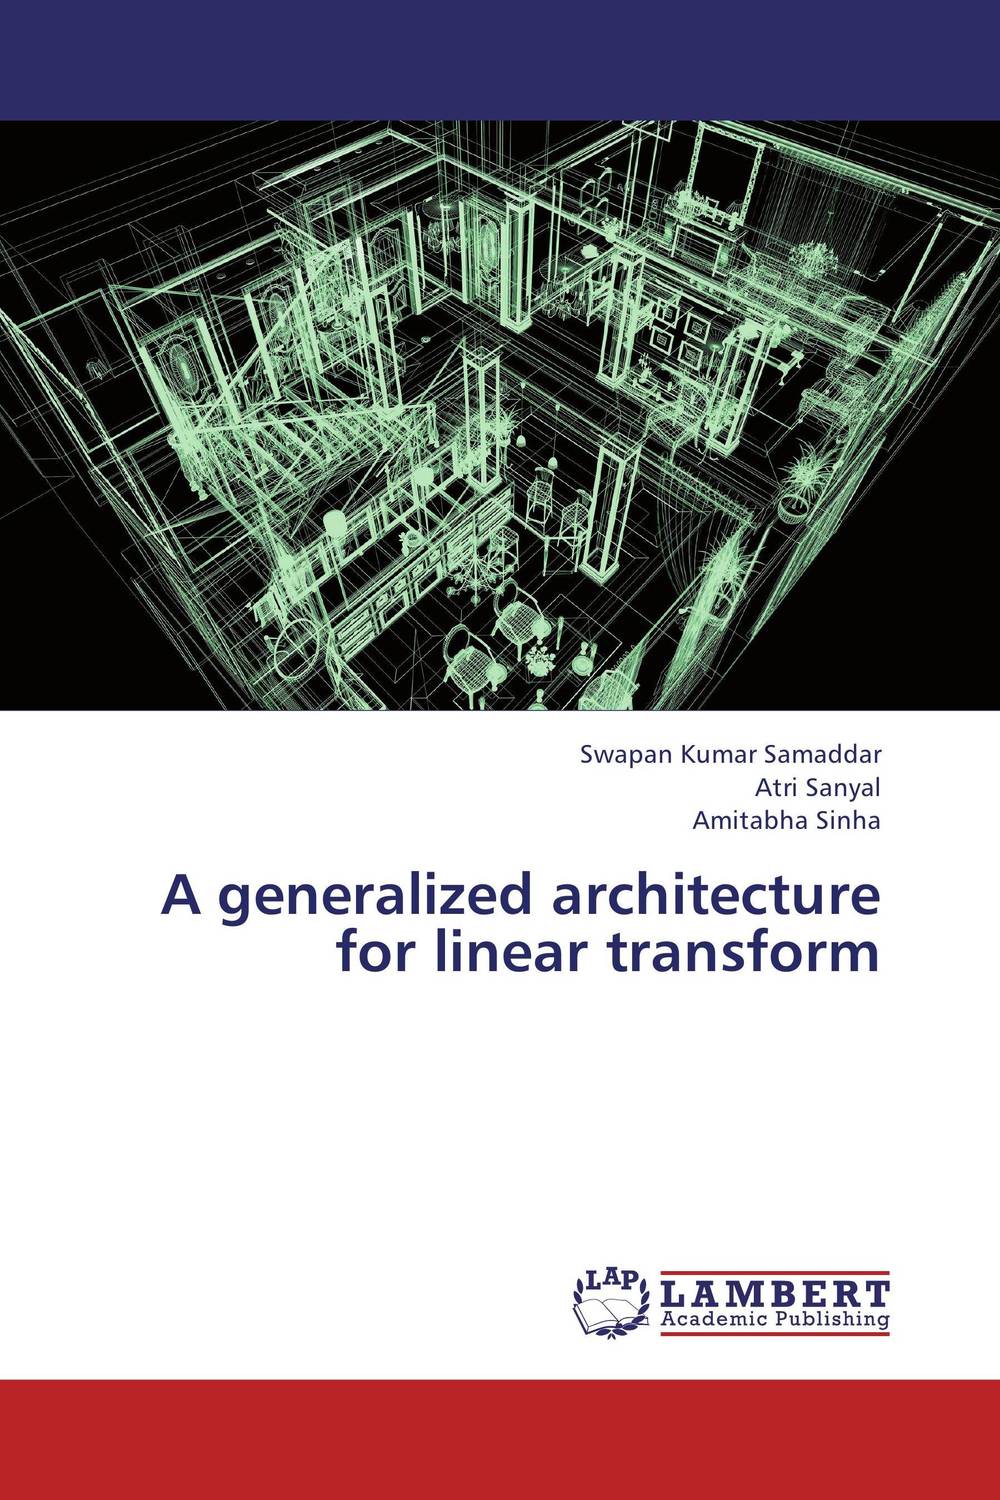 A generalized architecture for linear transform